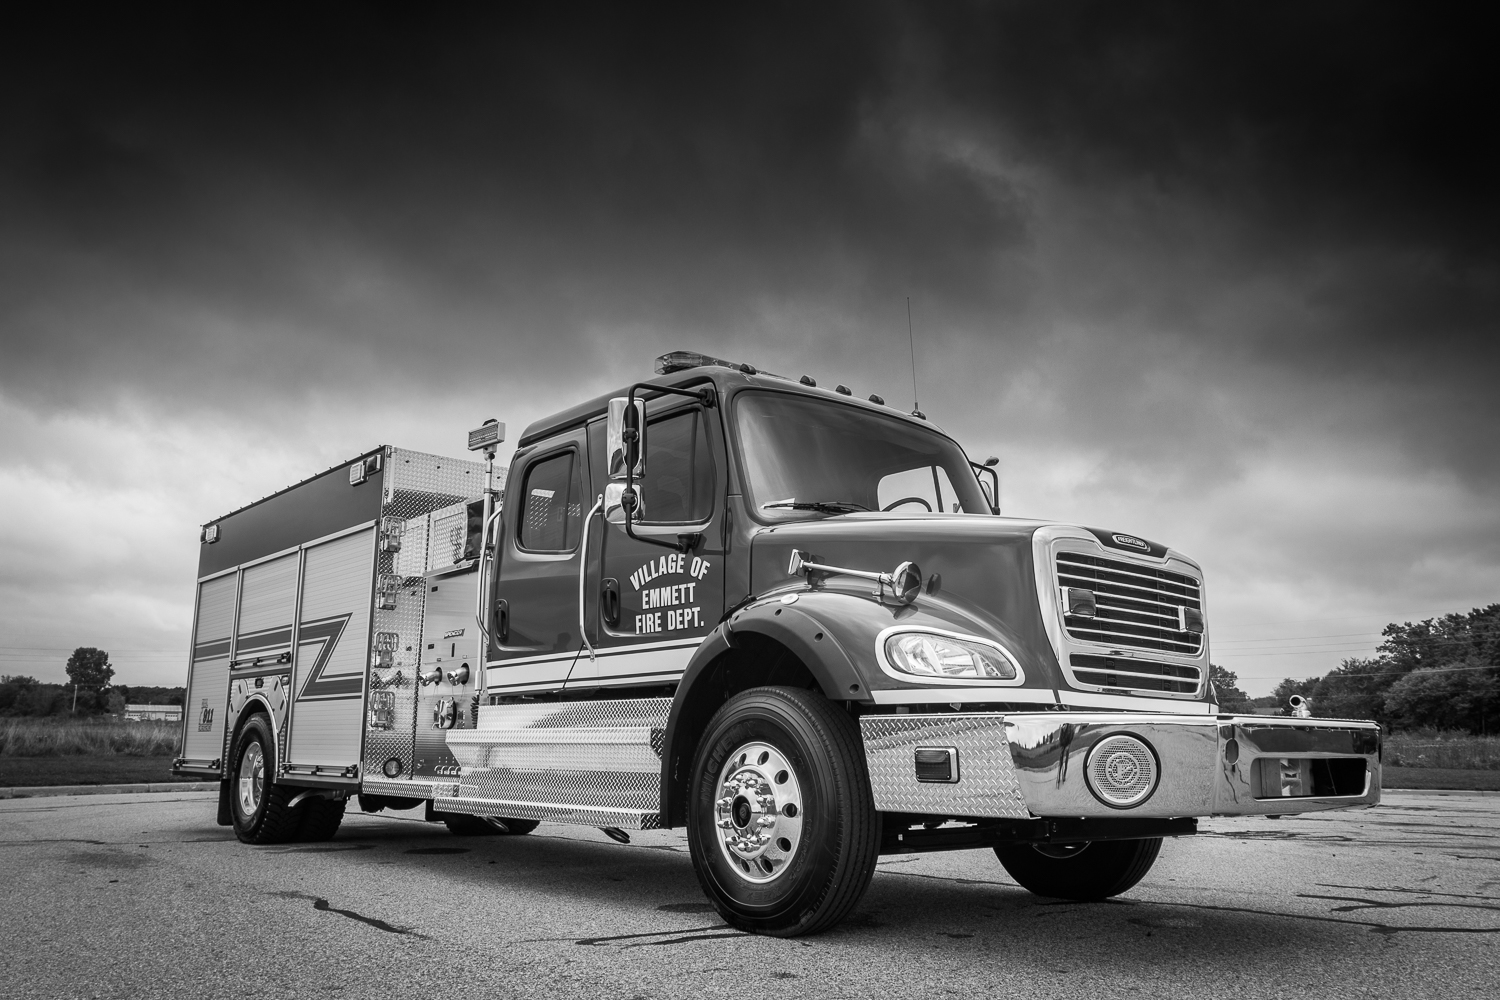 Black and White Fire Truck